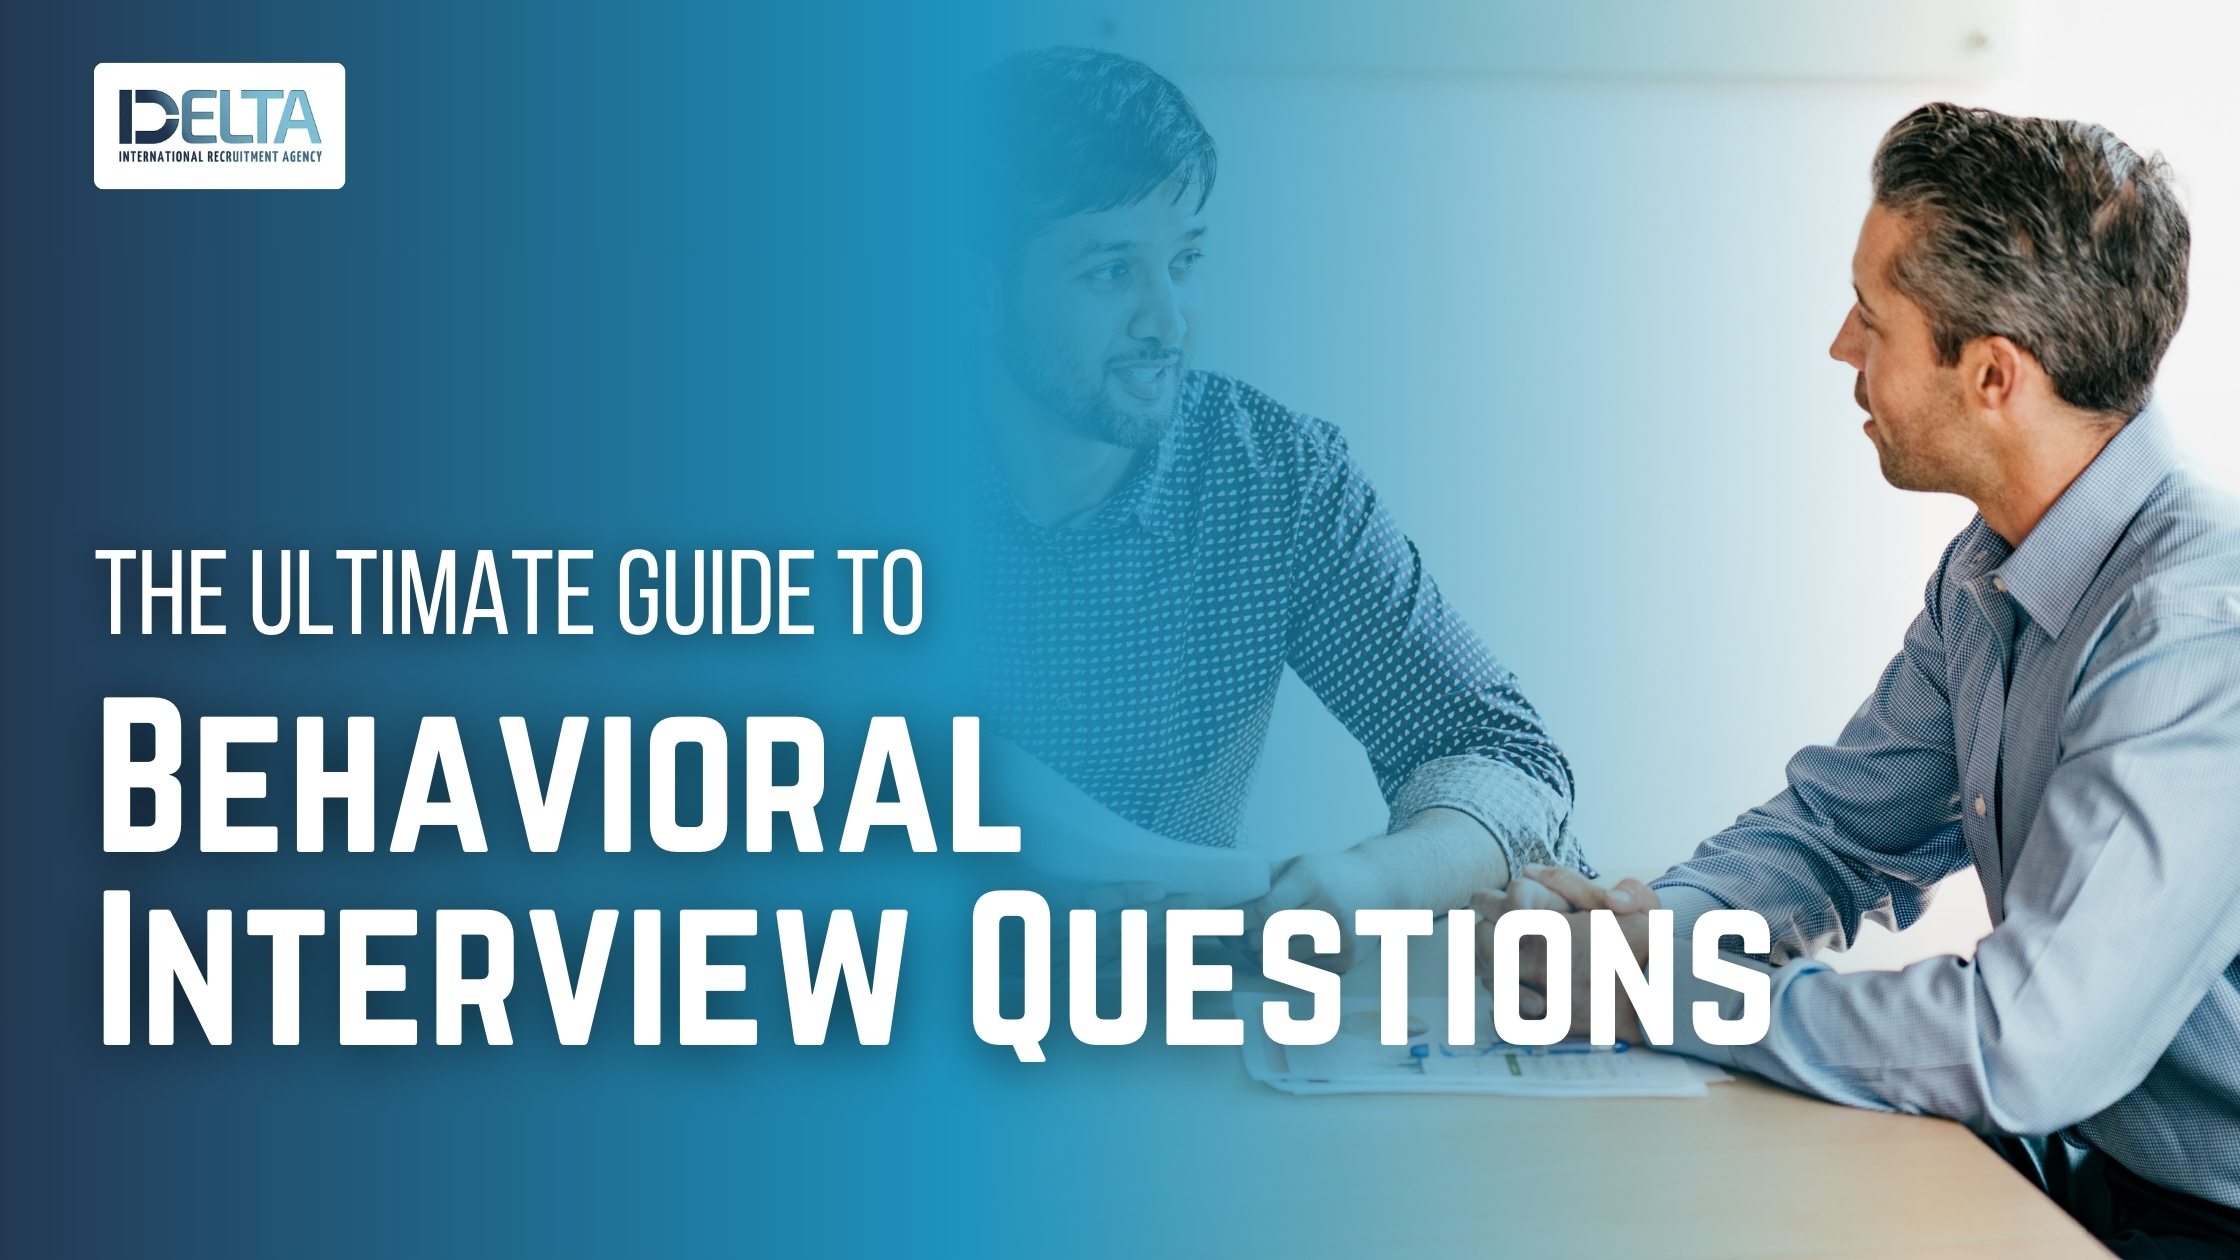 The Ultimate Guide to Behavioral Interview Questions